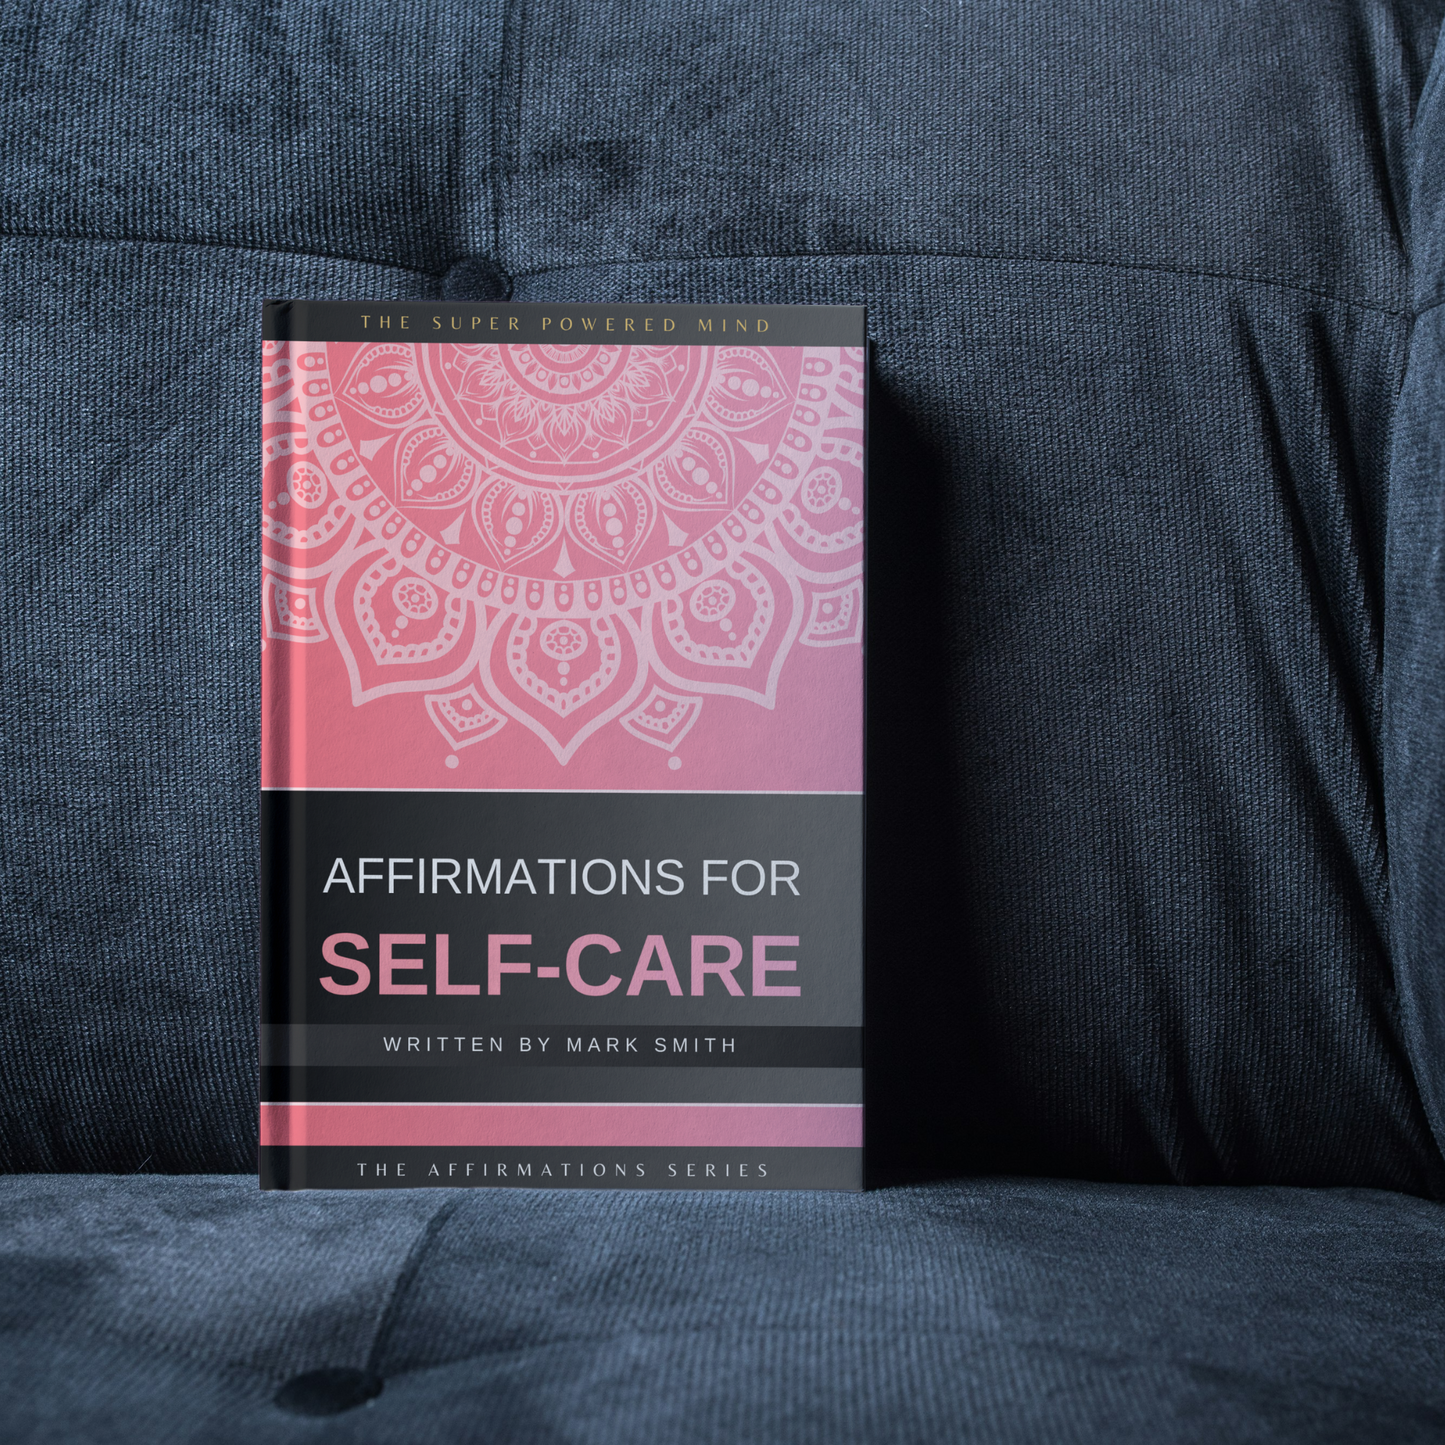 Affirmations for Self-Care (The Affirmations Series) - Written by Mark Smith (Digital Download eBook)